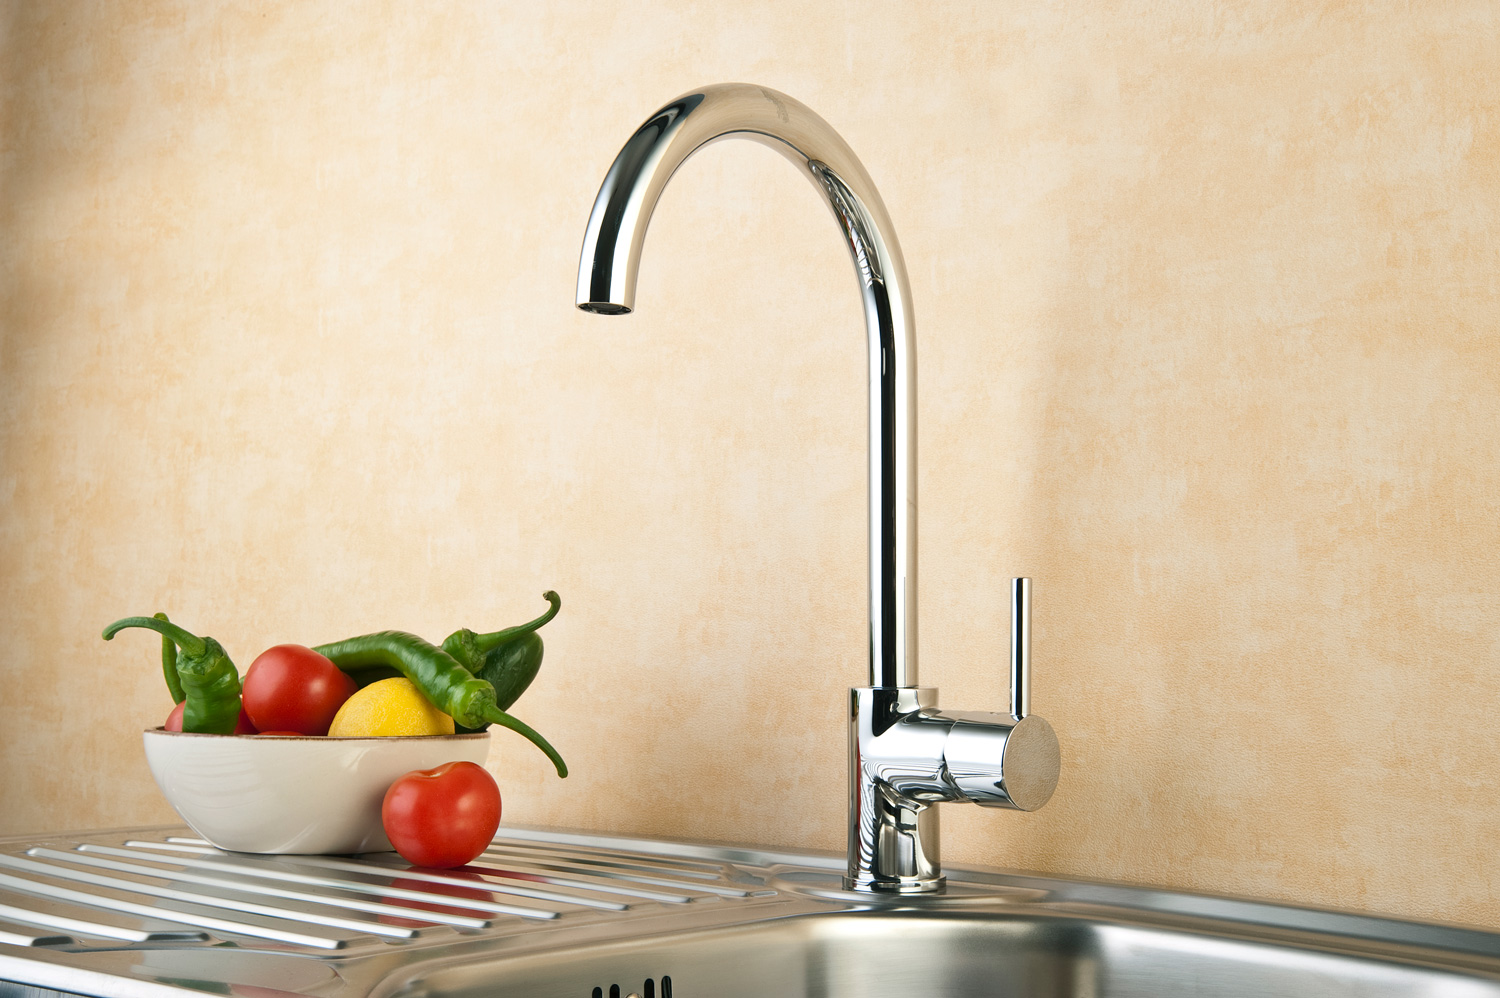 Modern stainles steel kitchen sink and chrome faucet.